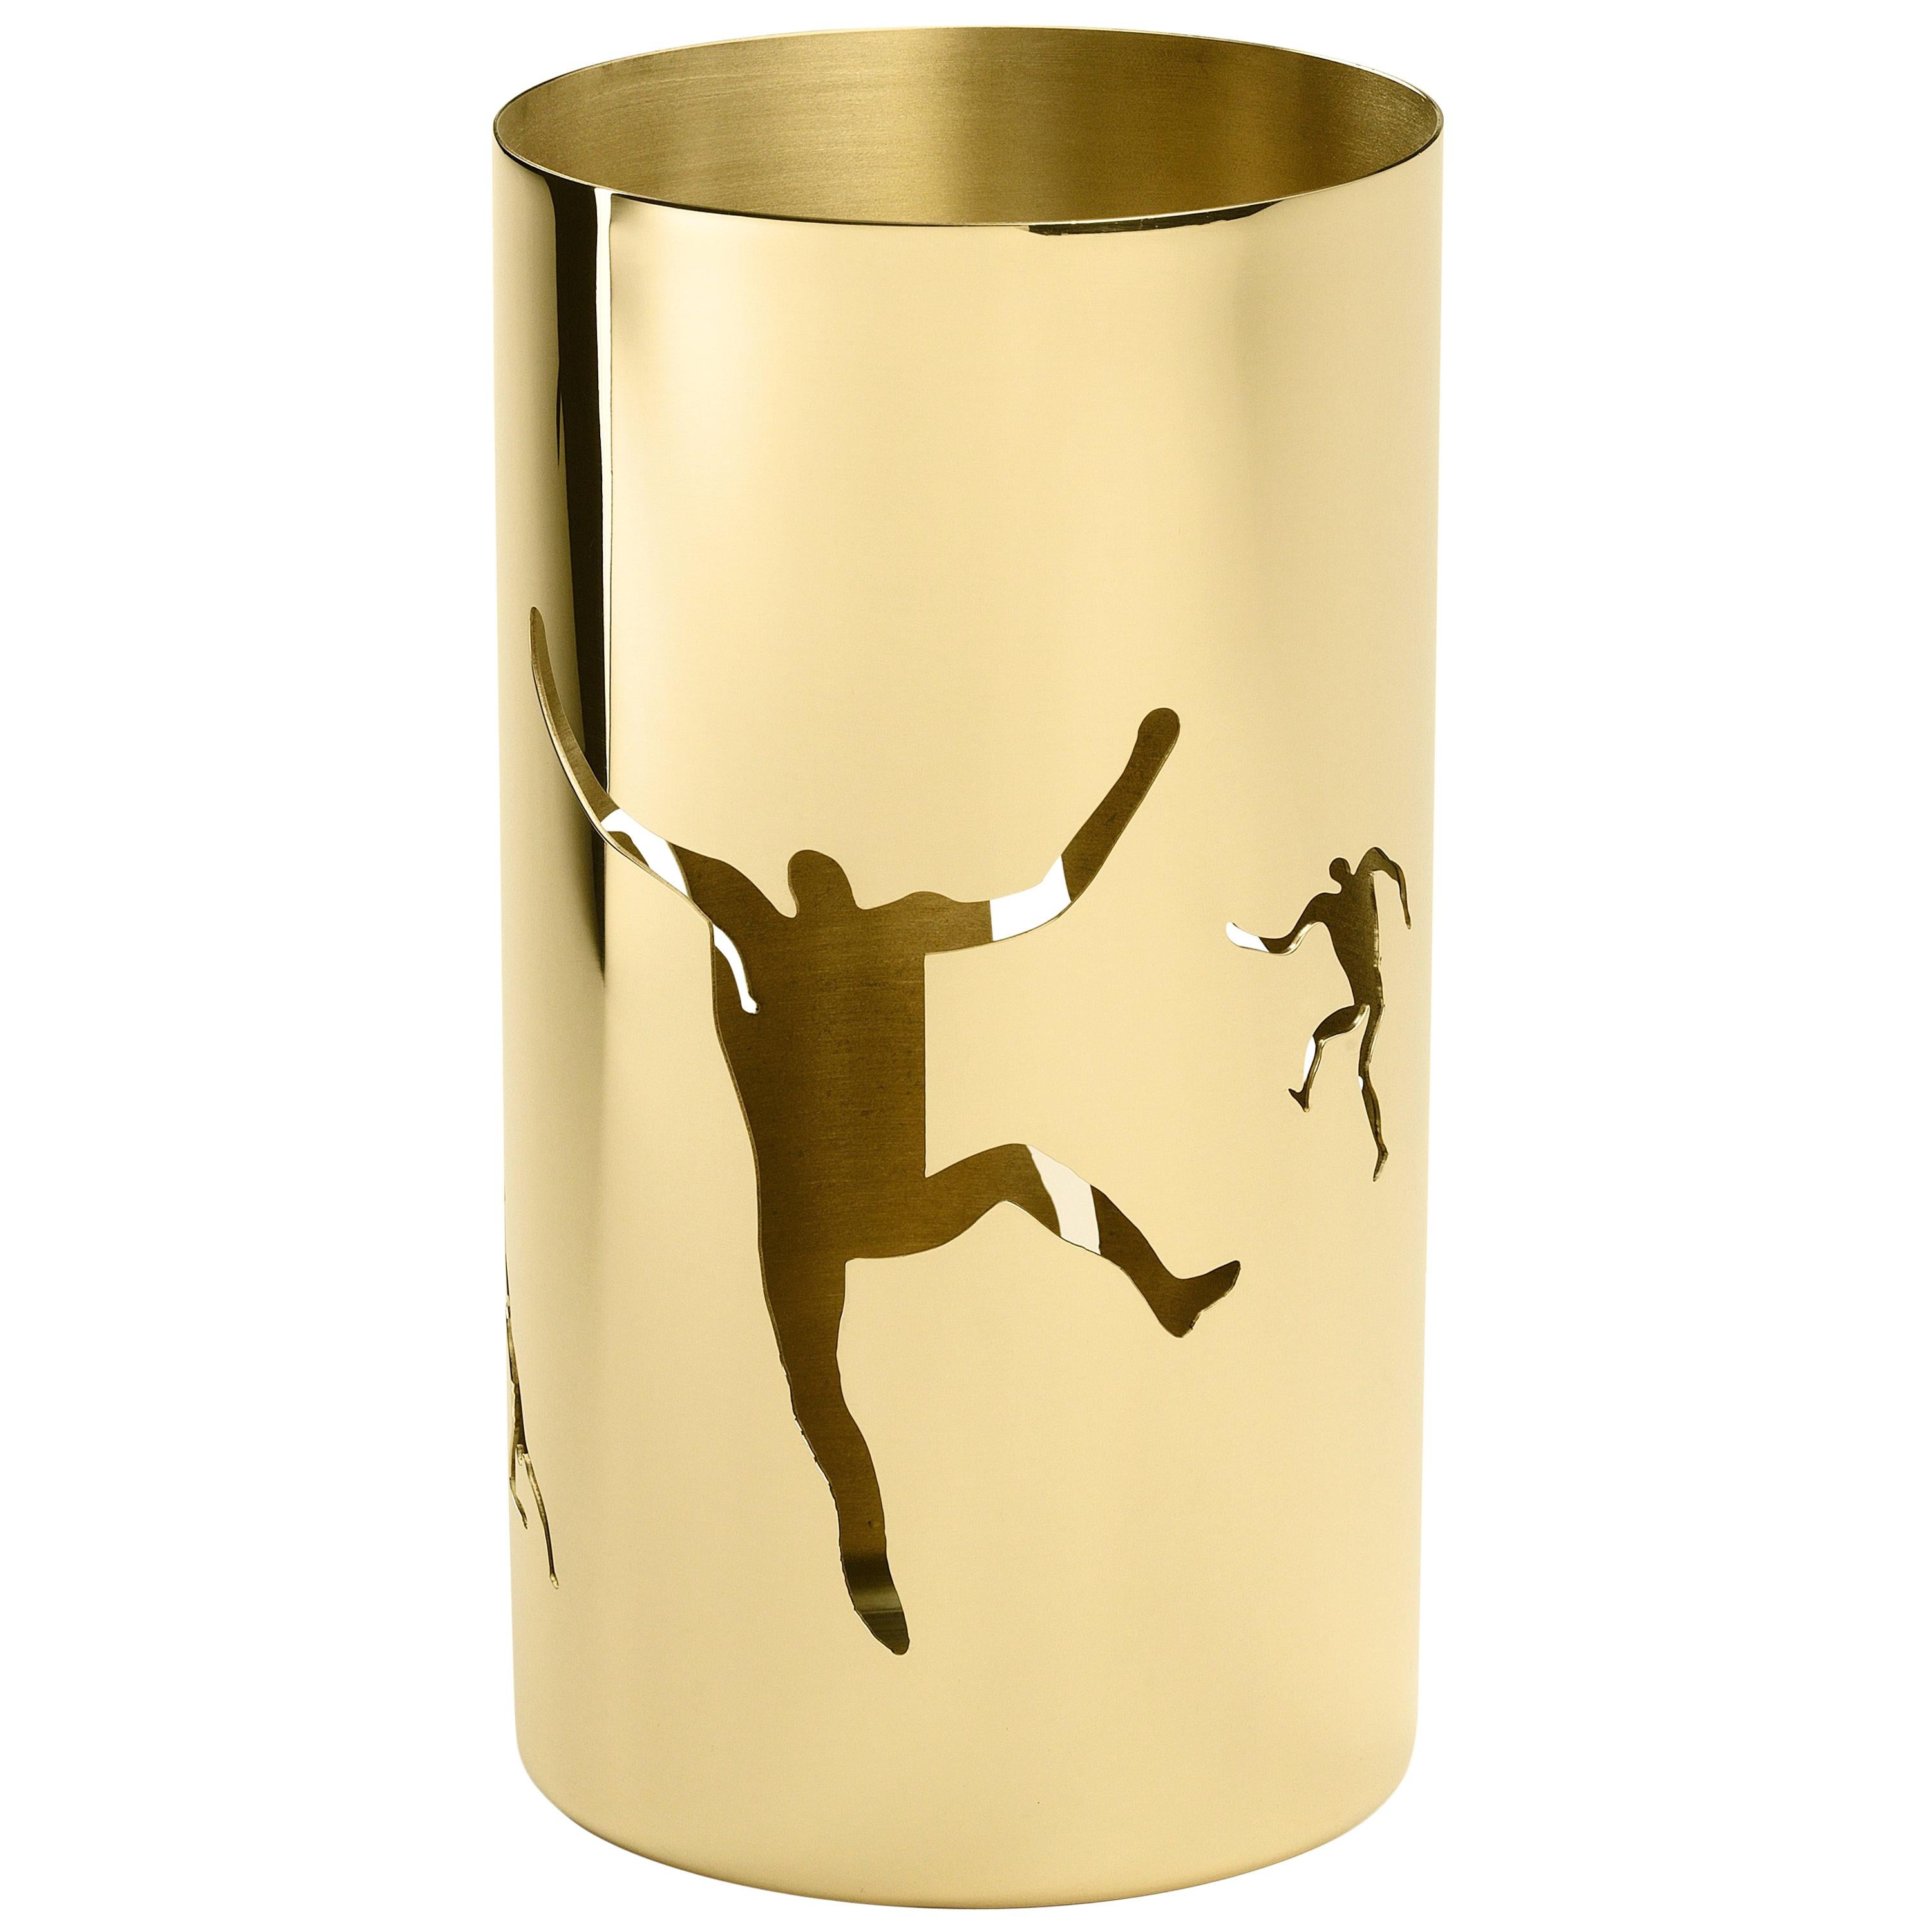 Cylinder Bowl in Polished Brass by Andrea Branzi